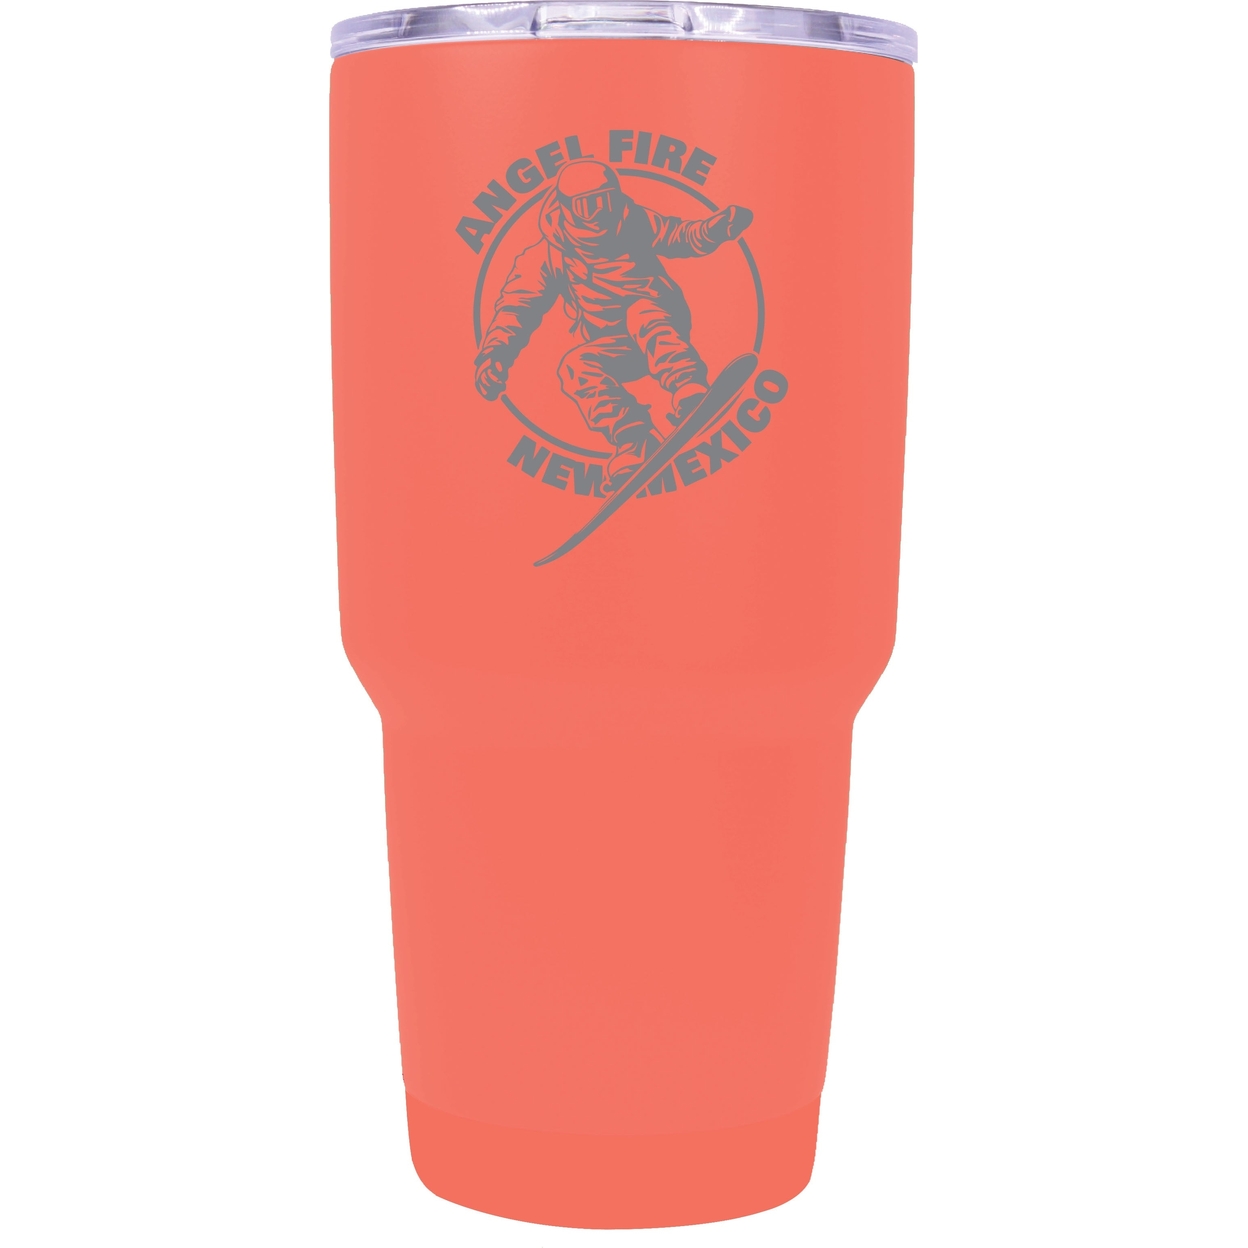 Angel Fire New Mexico Souvenir 24 Oz Engraved Insulated Stainless Steel Tumbler - Coral,,2-Pack